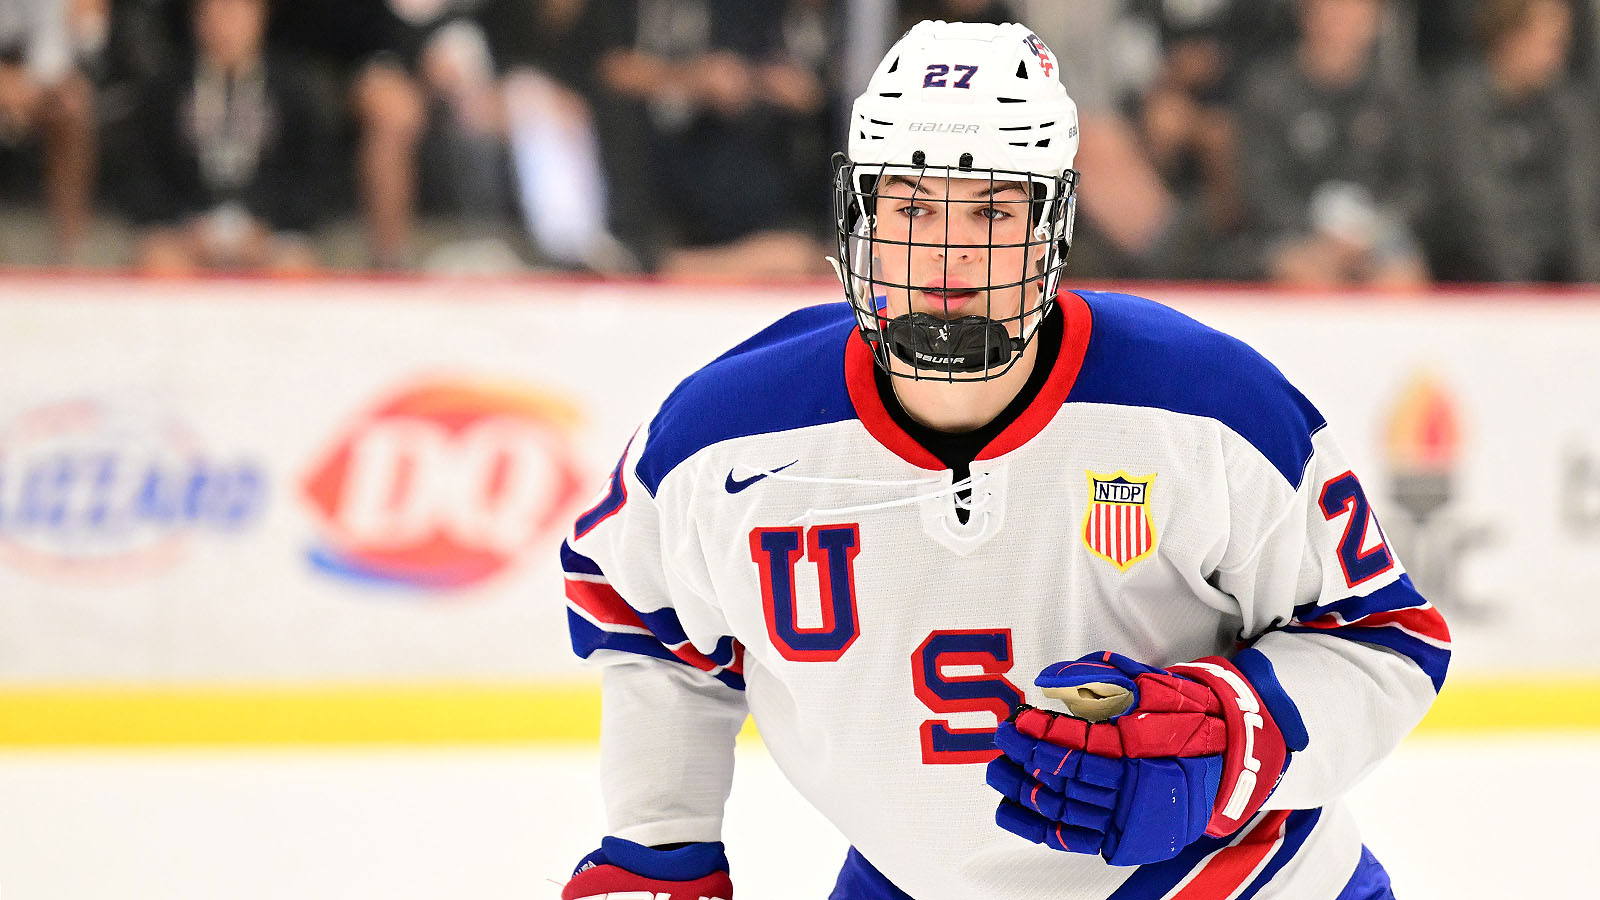 Jacob Fowler: 2023 NHL Draft Prospect Profile; 2022-23's Best USHL  Goaltender - All About The Jersey